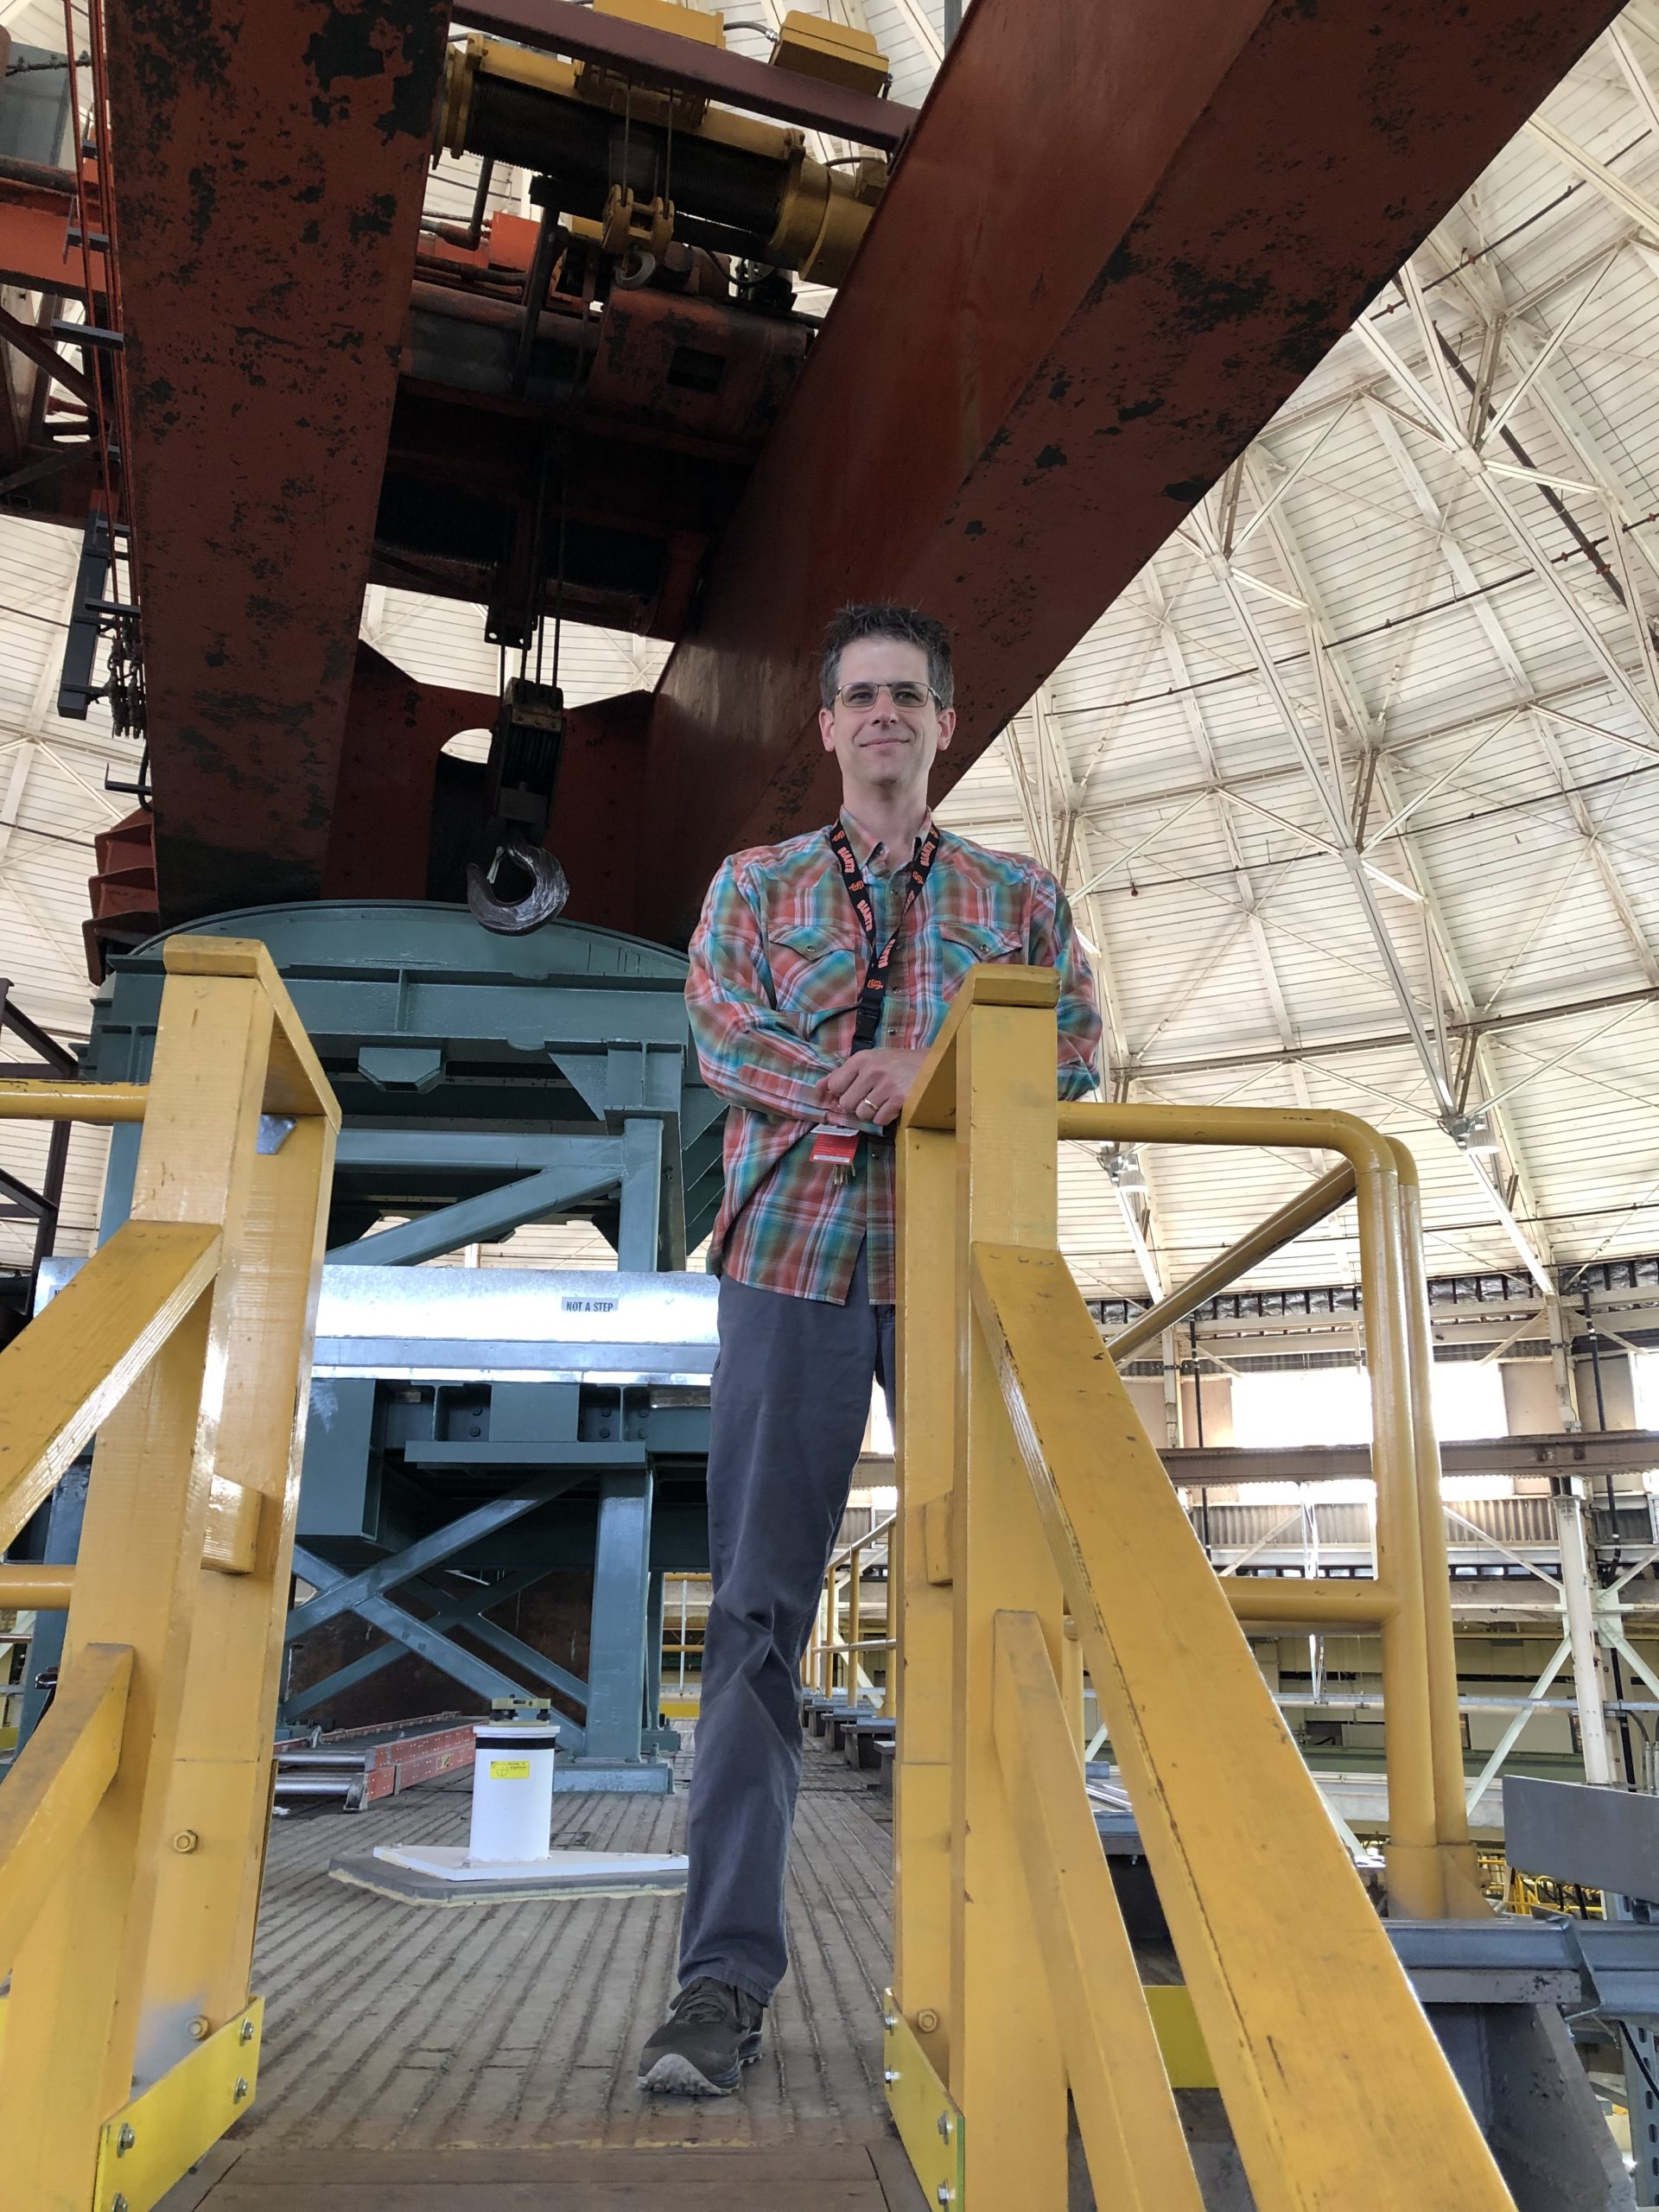 Jeff Troutman standing on top of the magnet yoke and under the orange crane